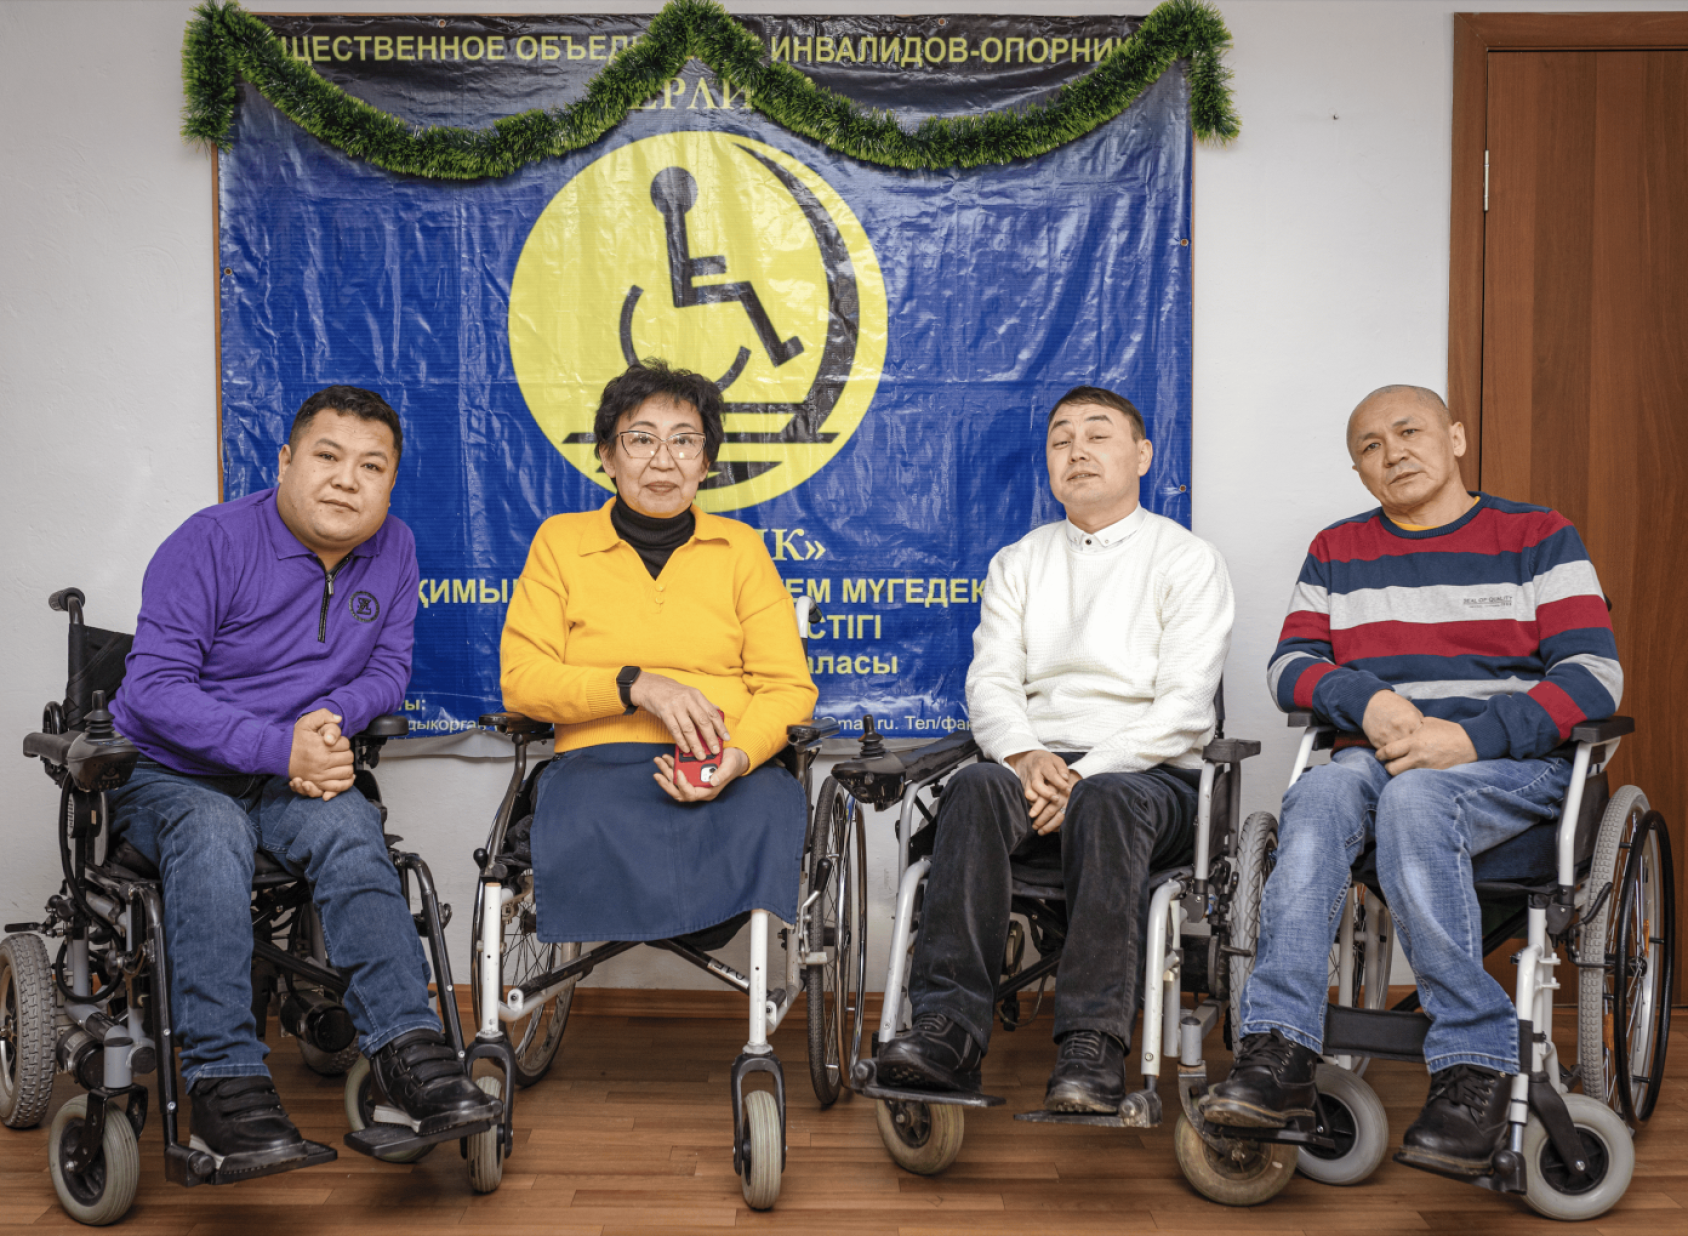 Four persons on wheelchairs against a blue background